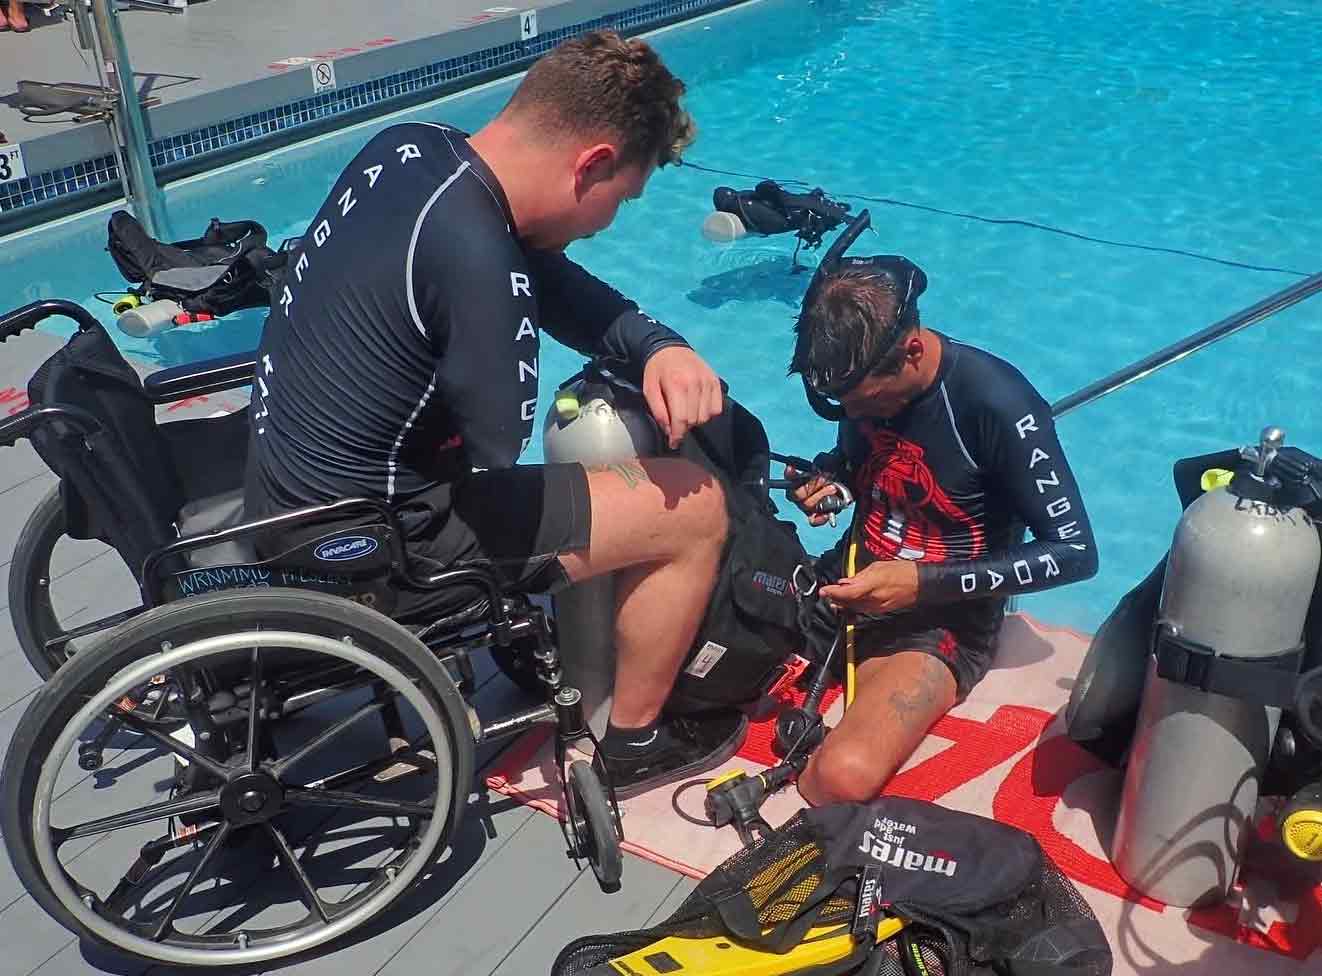 Man in wheel chair and amputee prepare for scuba lessons at swimming pool